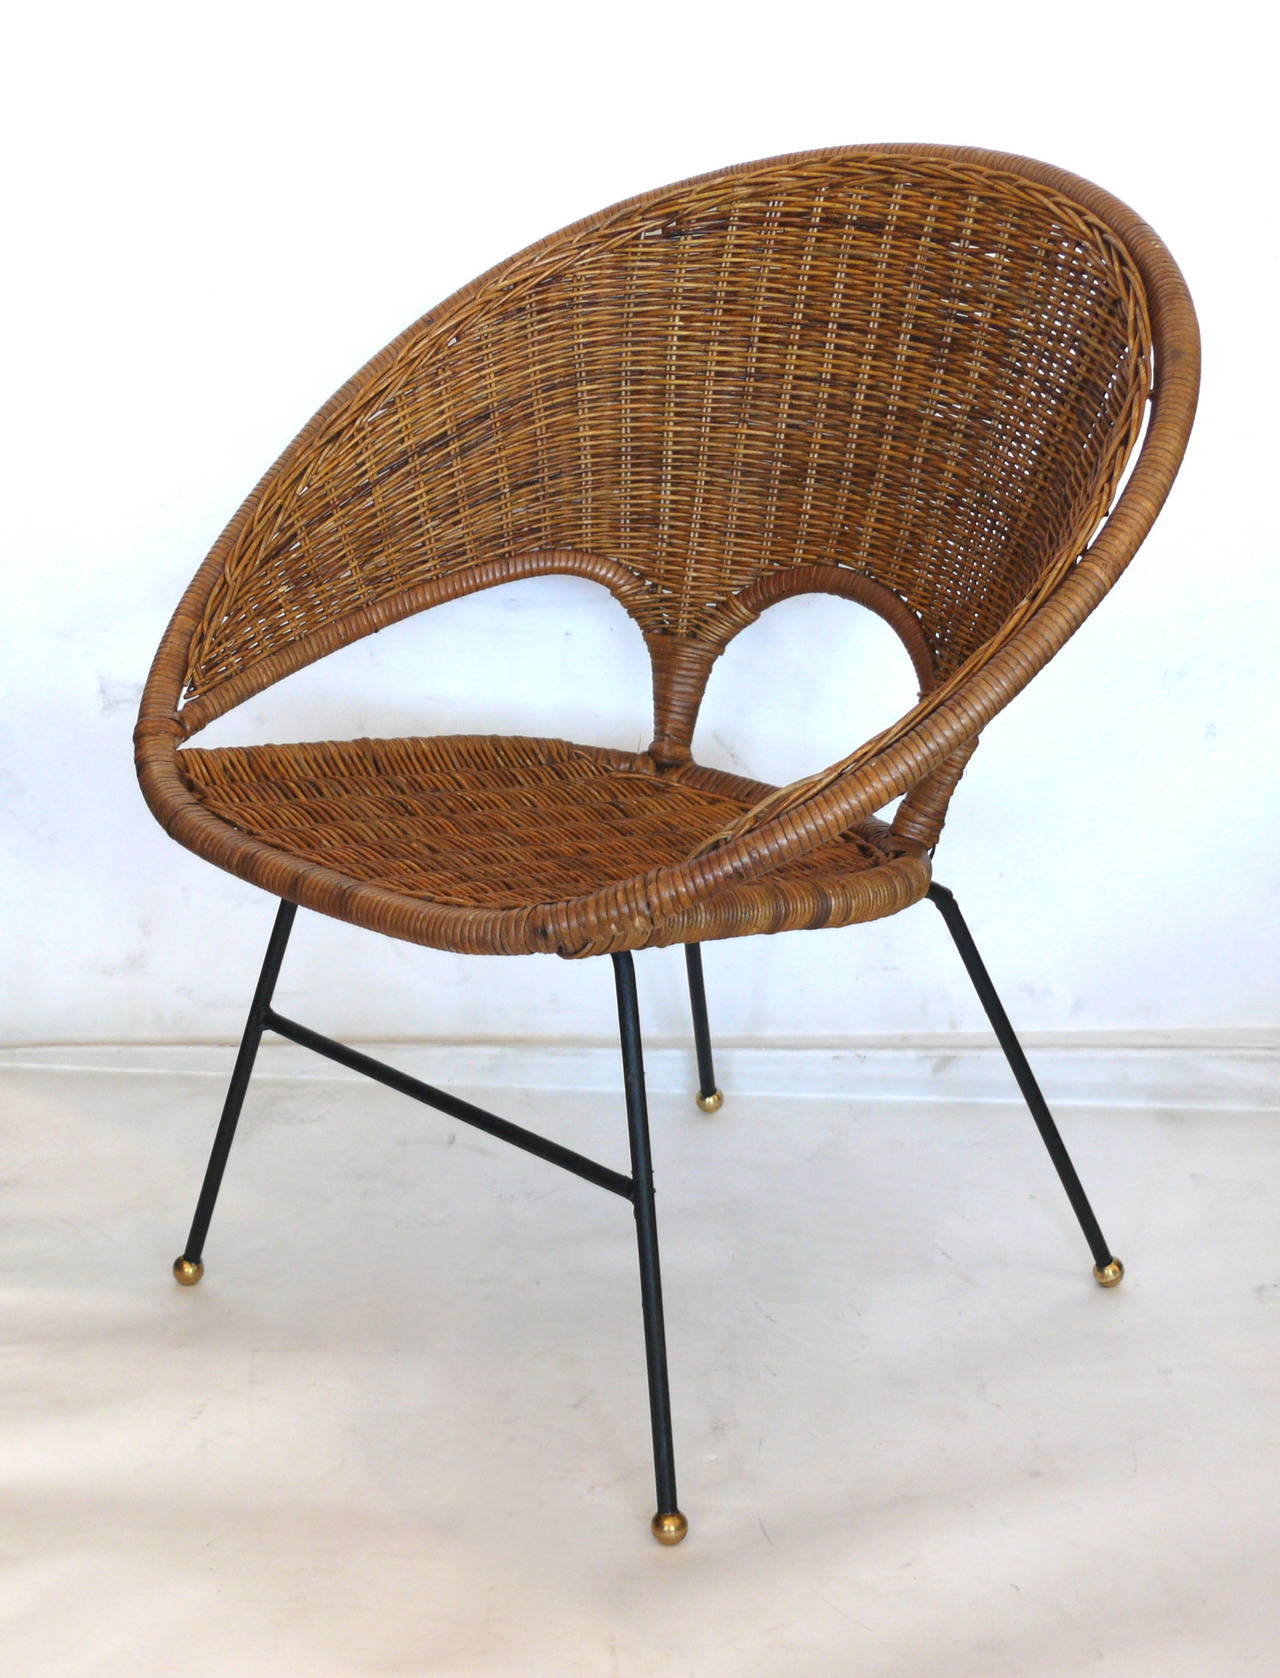 Sculptural Wicker and Rattan Chairs 1